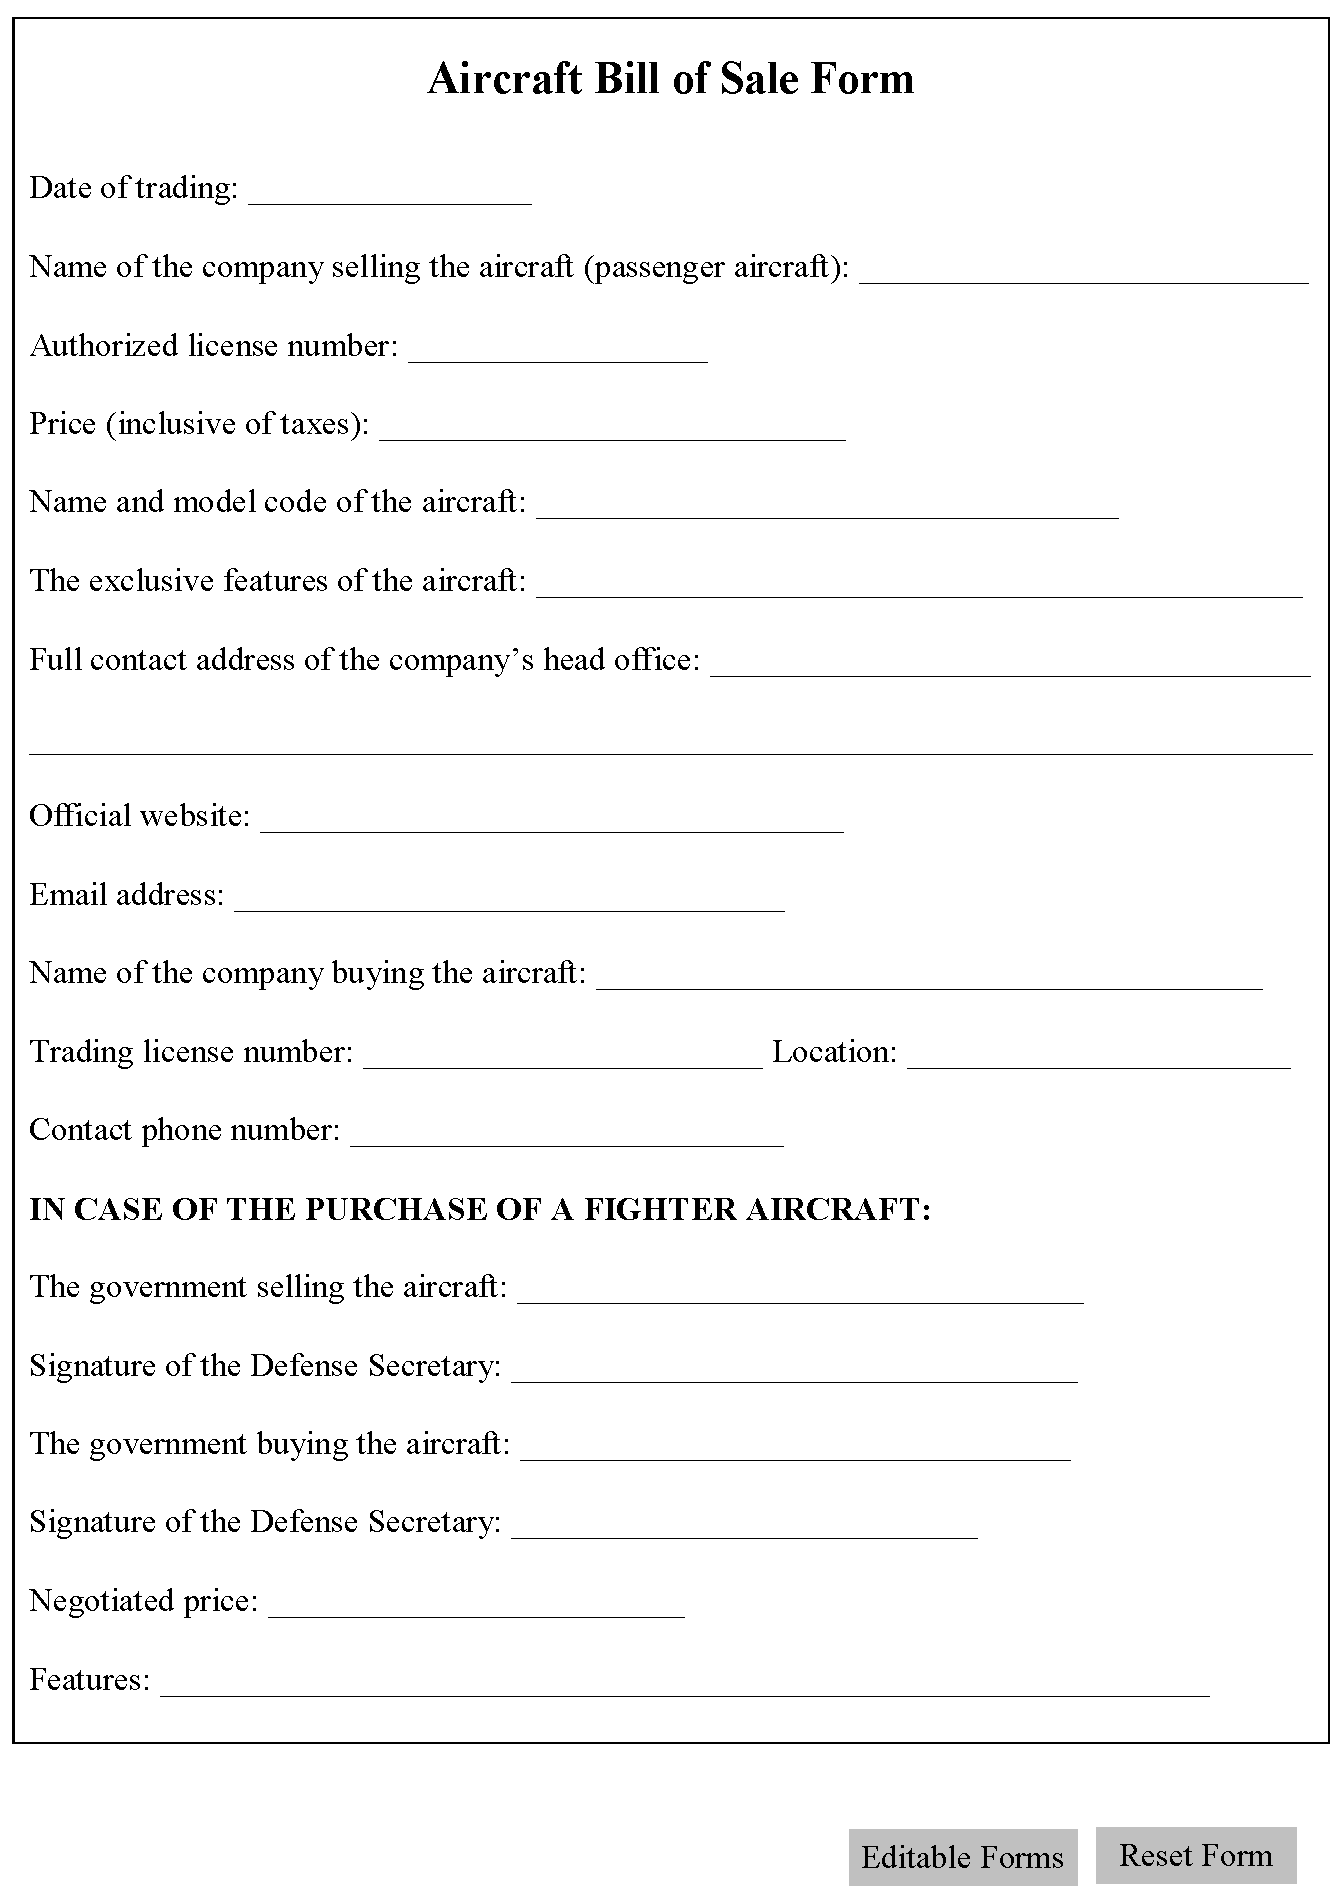 Aircraft Bill of Sale Form